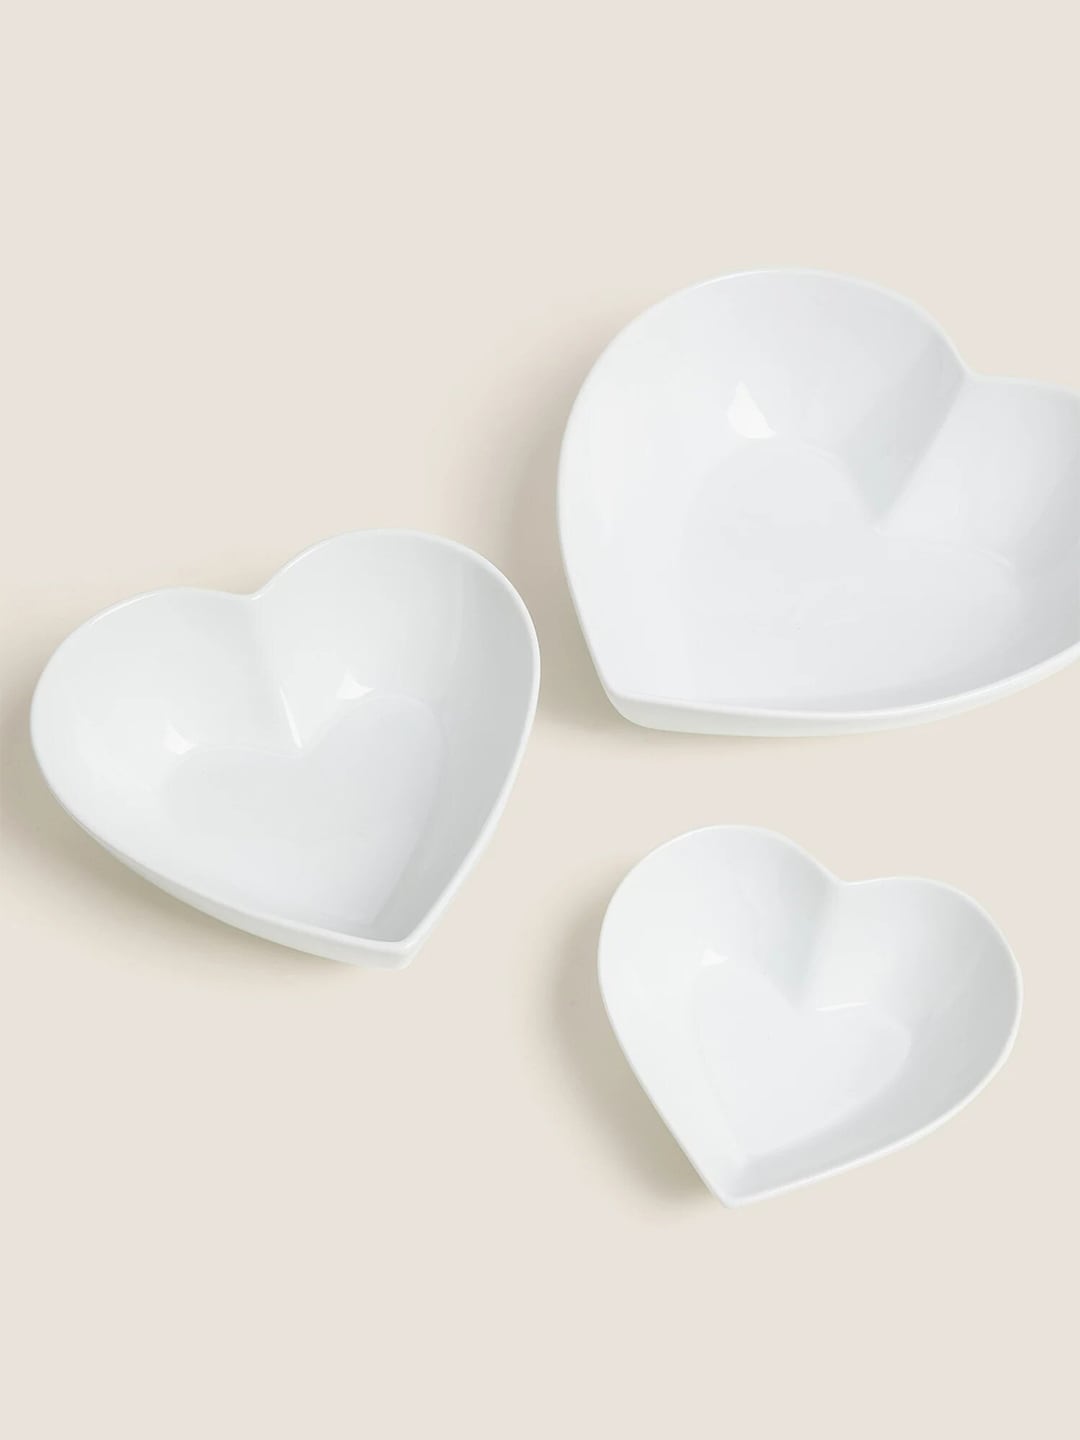 Marks & Spencer White 1 Piece Heart Shape Porcelain Glossy Bowls Price in India